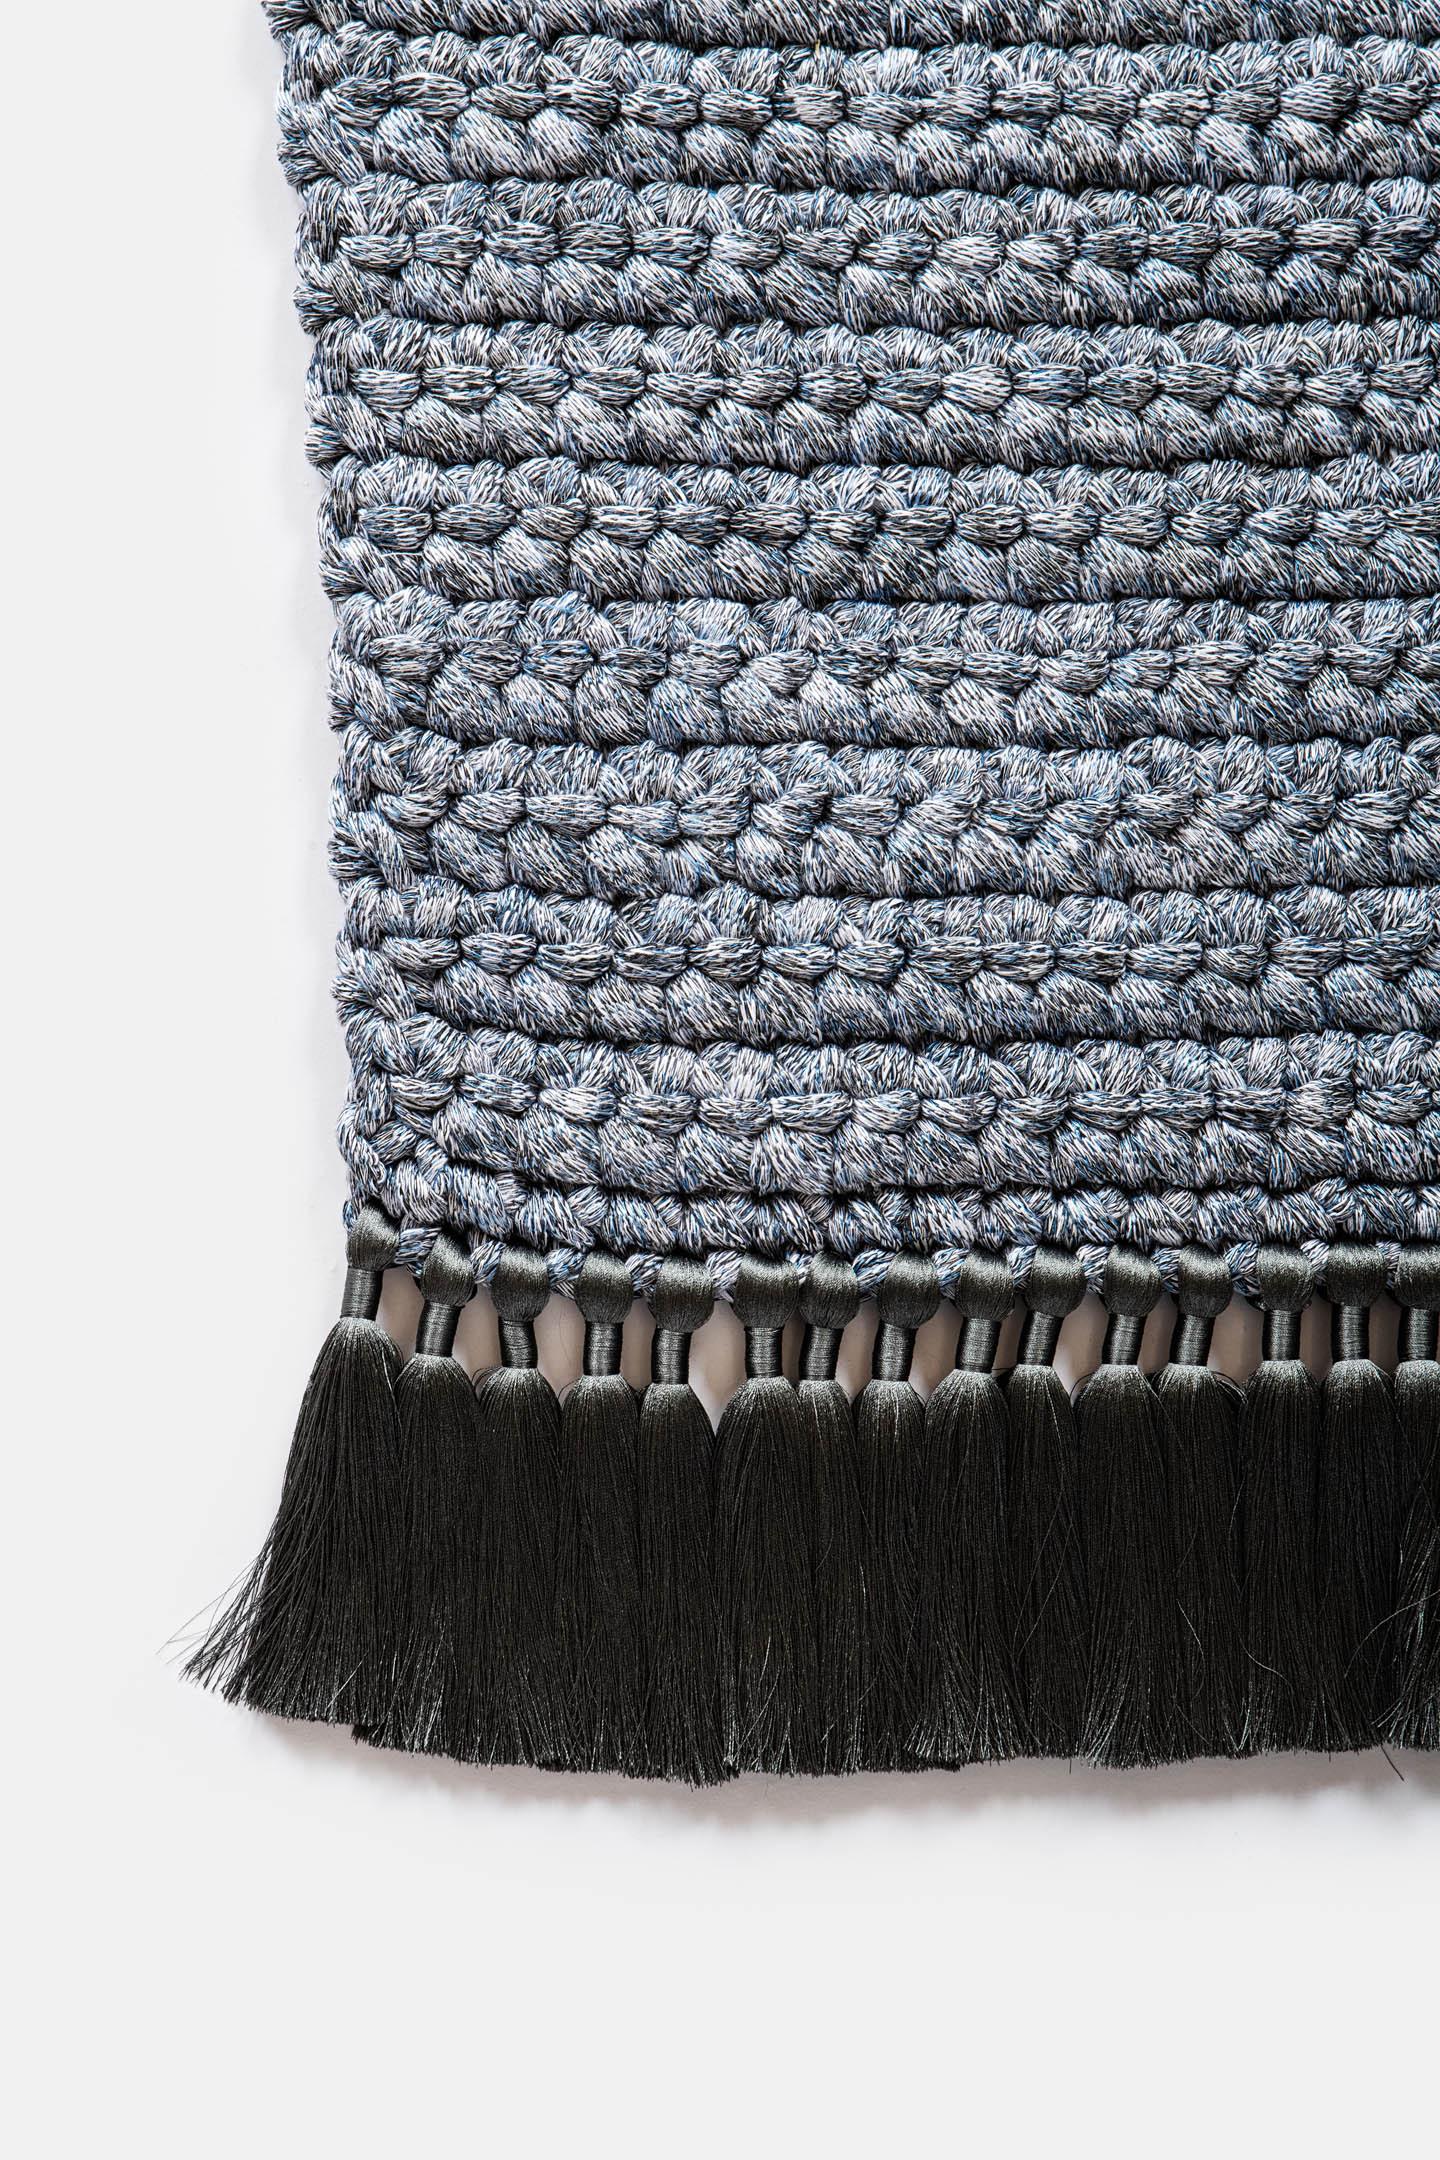 Israeli Handmade Crochet Thick Rug in Blue Grey Made of Cotton & Polyester by Iota For Sale